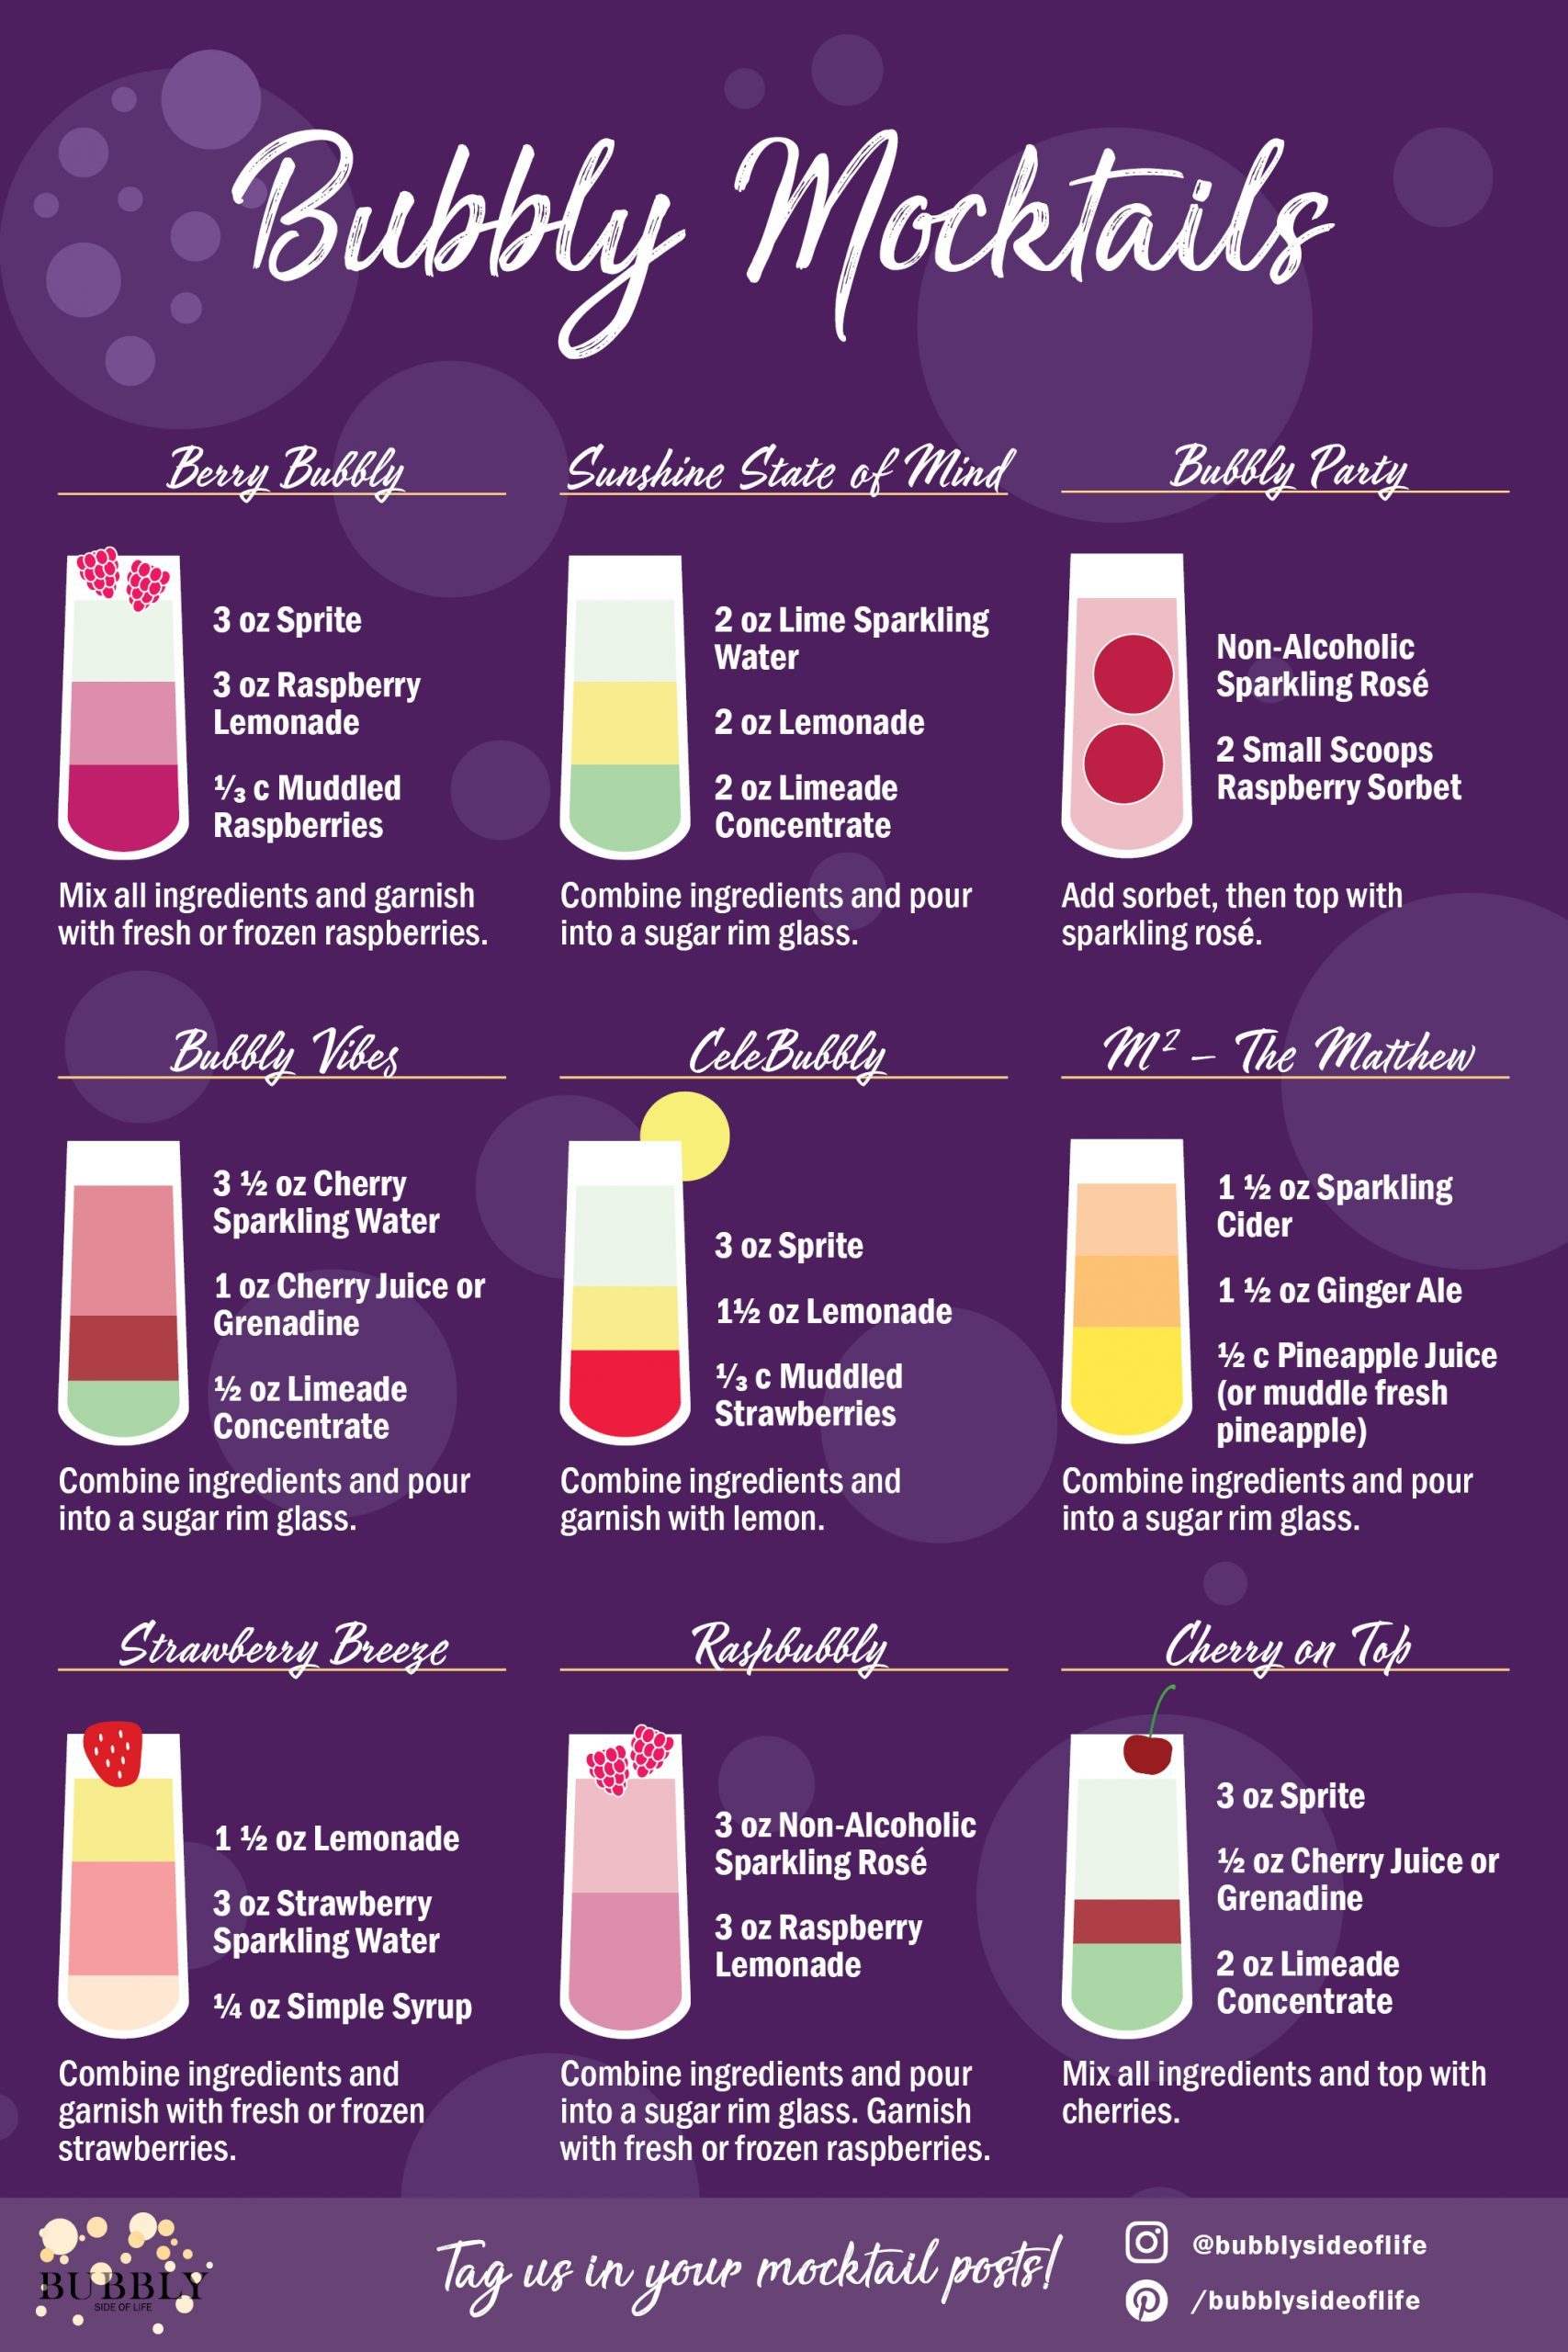 Bubbly Mocktails by Bubbly Side of Life